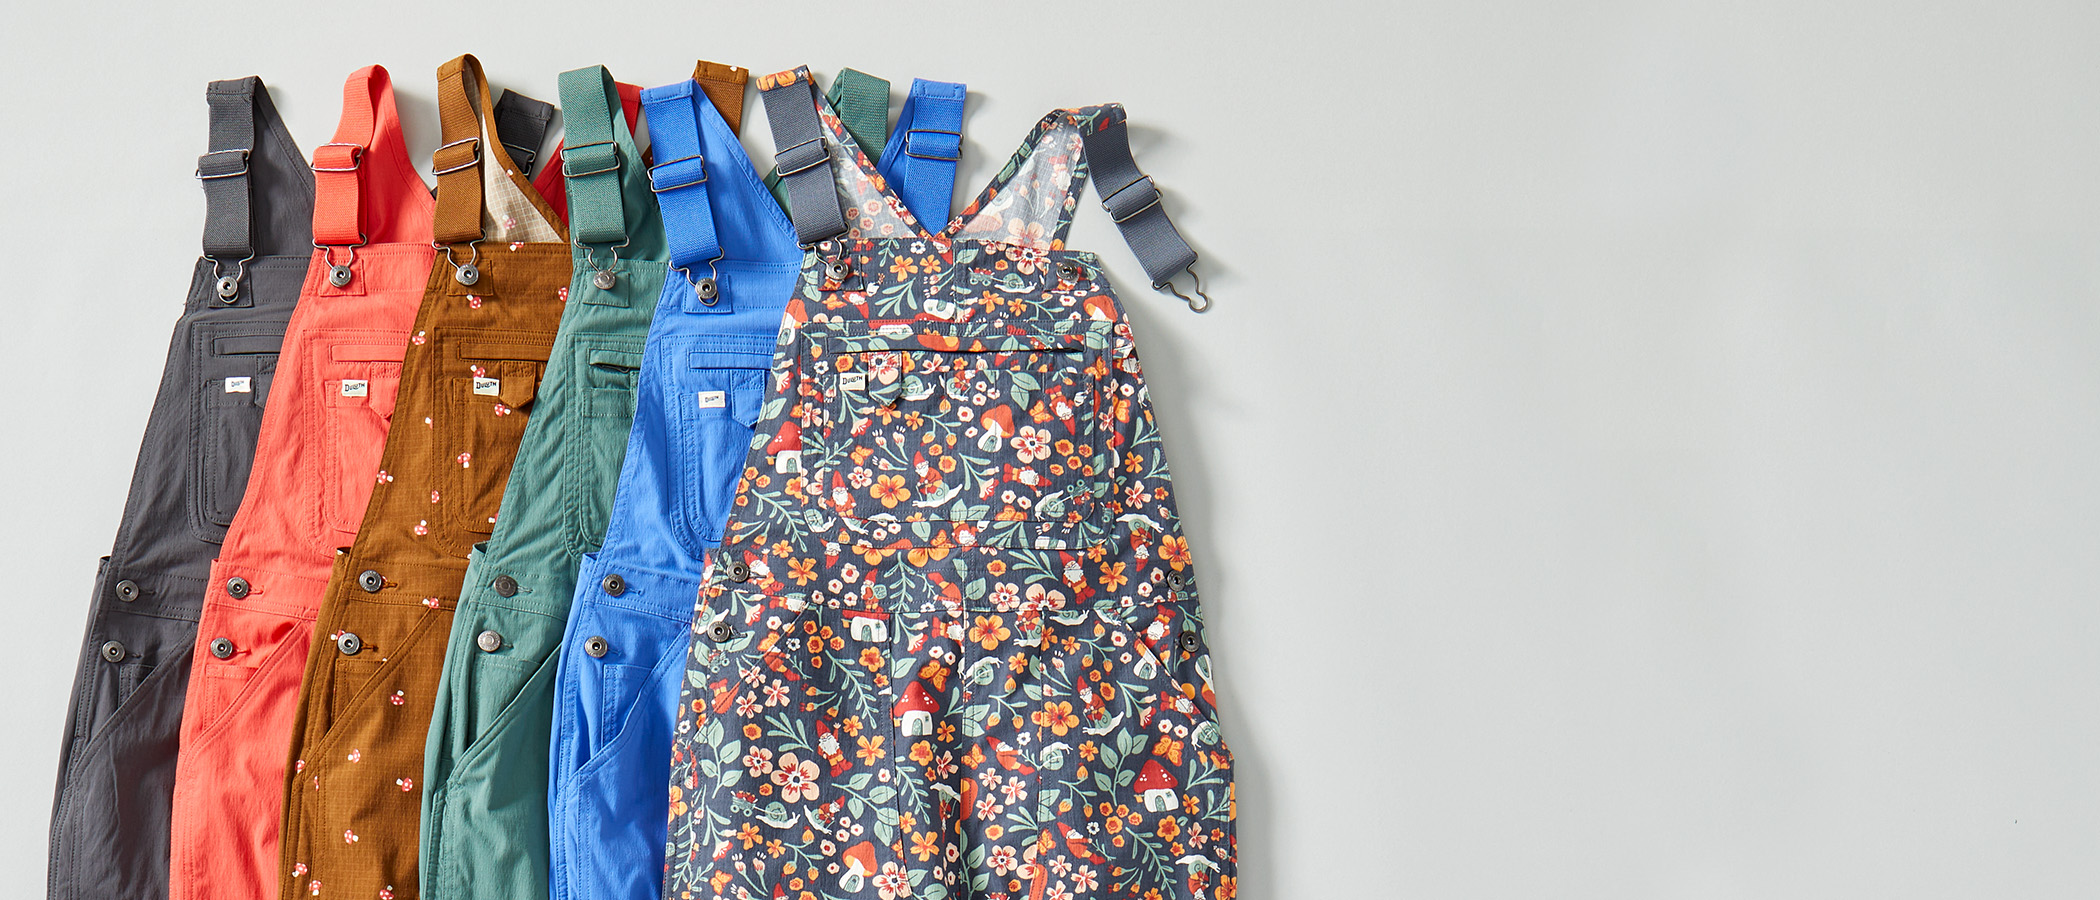 A collection of heirloom overalls in new colors and patterns